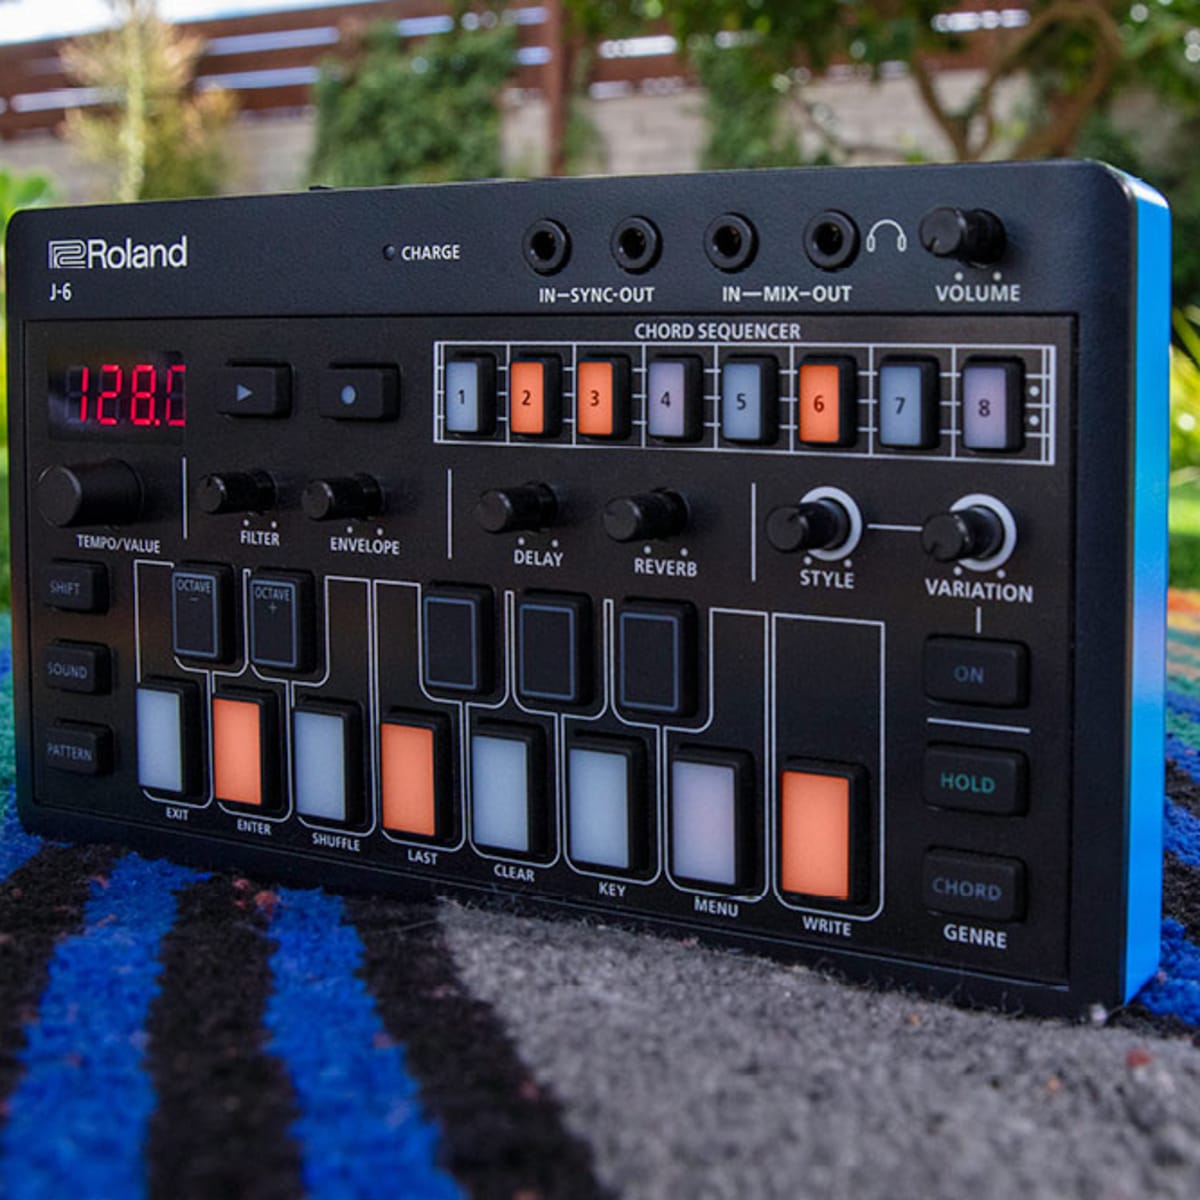 Roland Aira Compact J-6 Review: Amazing Analog Chords For 